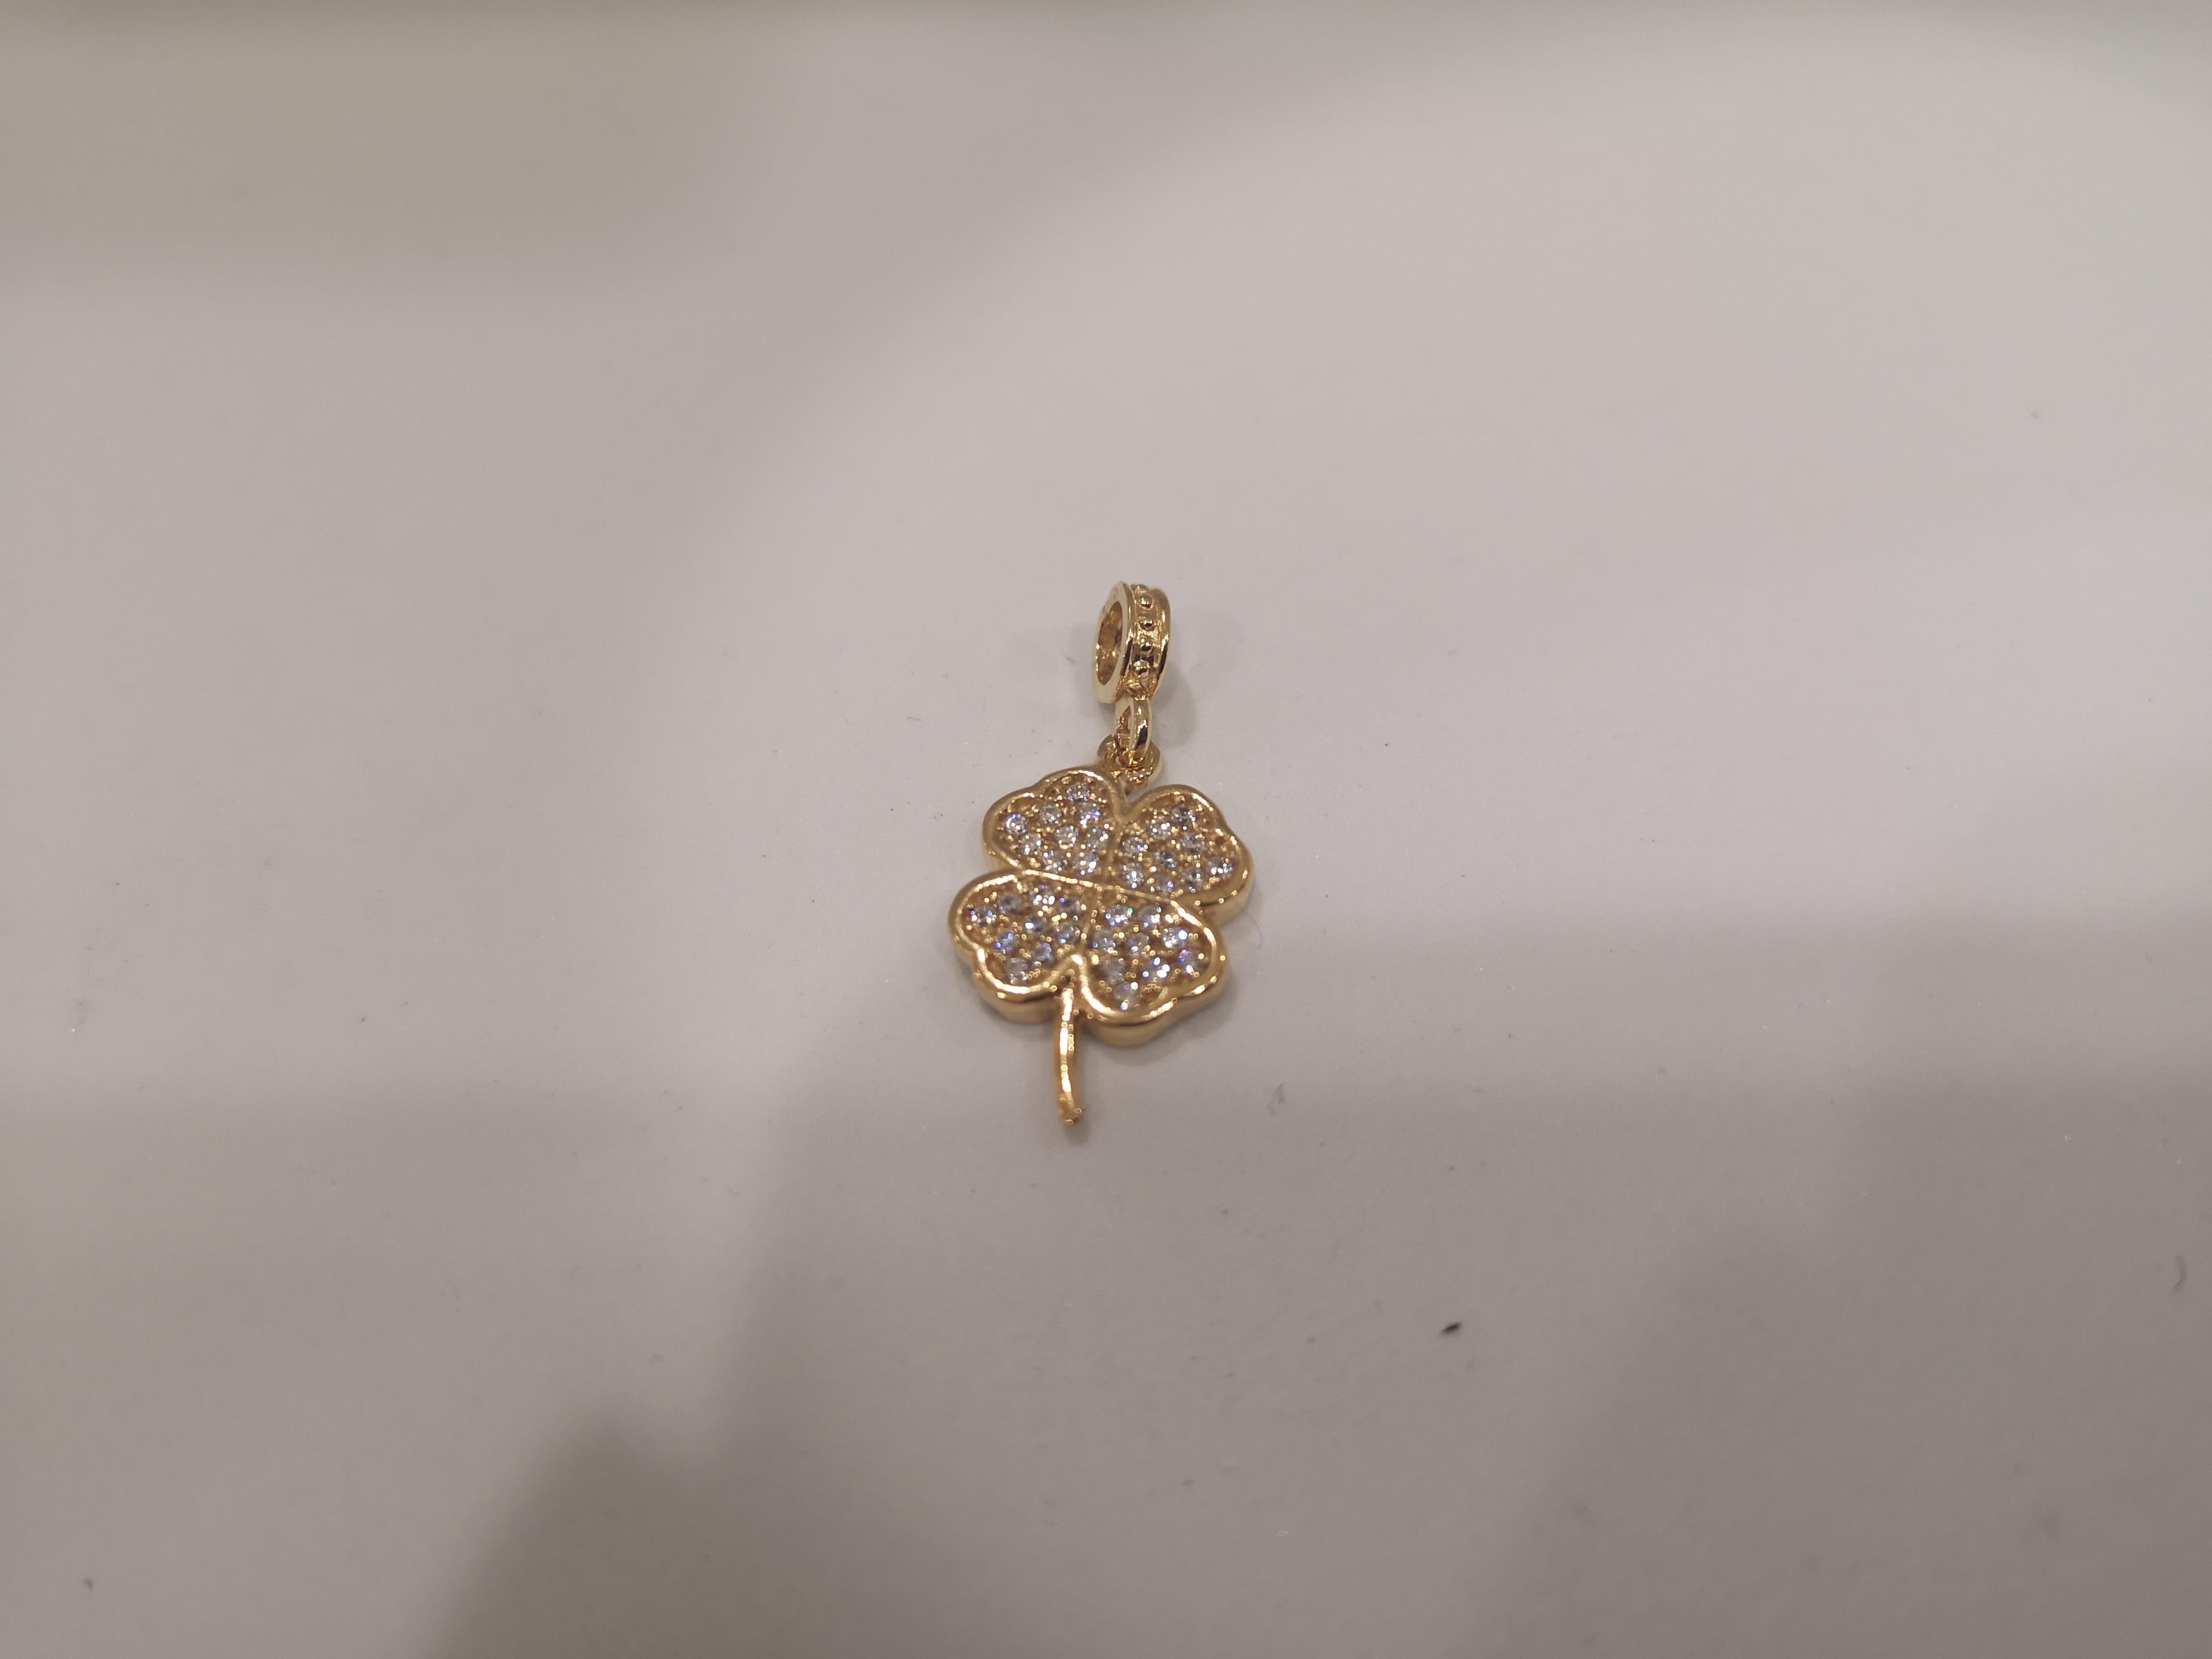 Gold plated four-leaf clover zirconia charm
Totally handmade in Italy gold plated 925% silver
Charm can be add on a necklace or on a bracelet
measurements: 1 cm